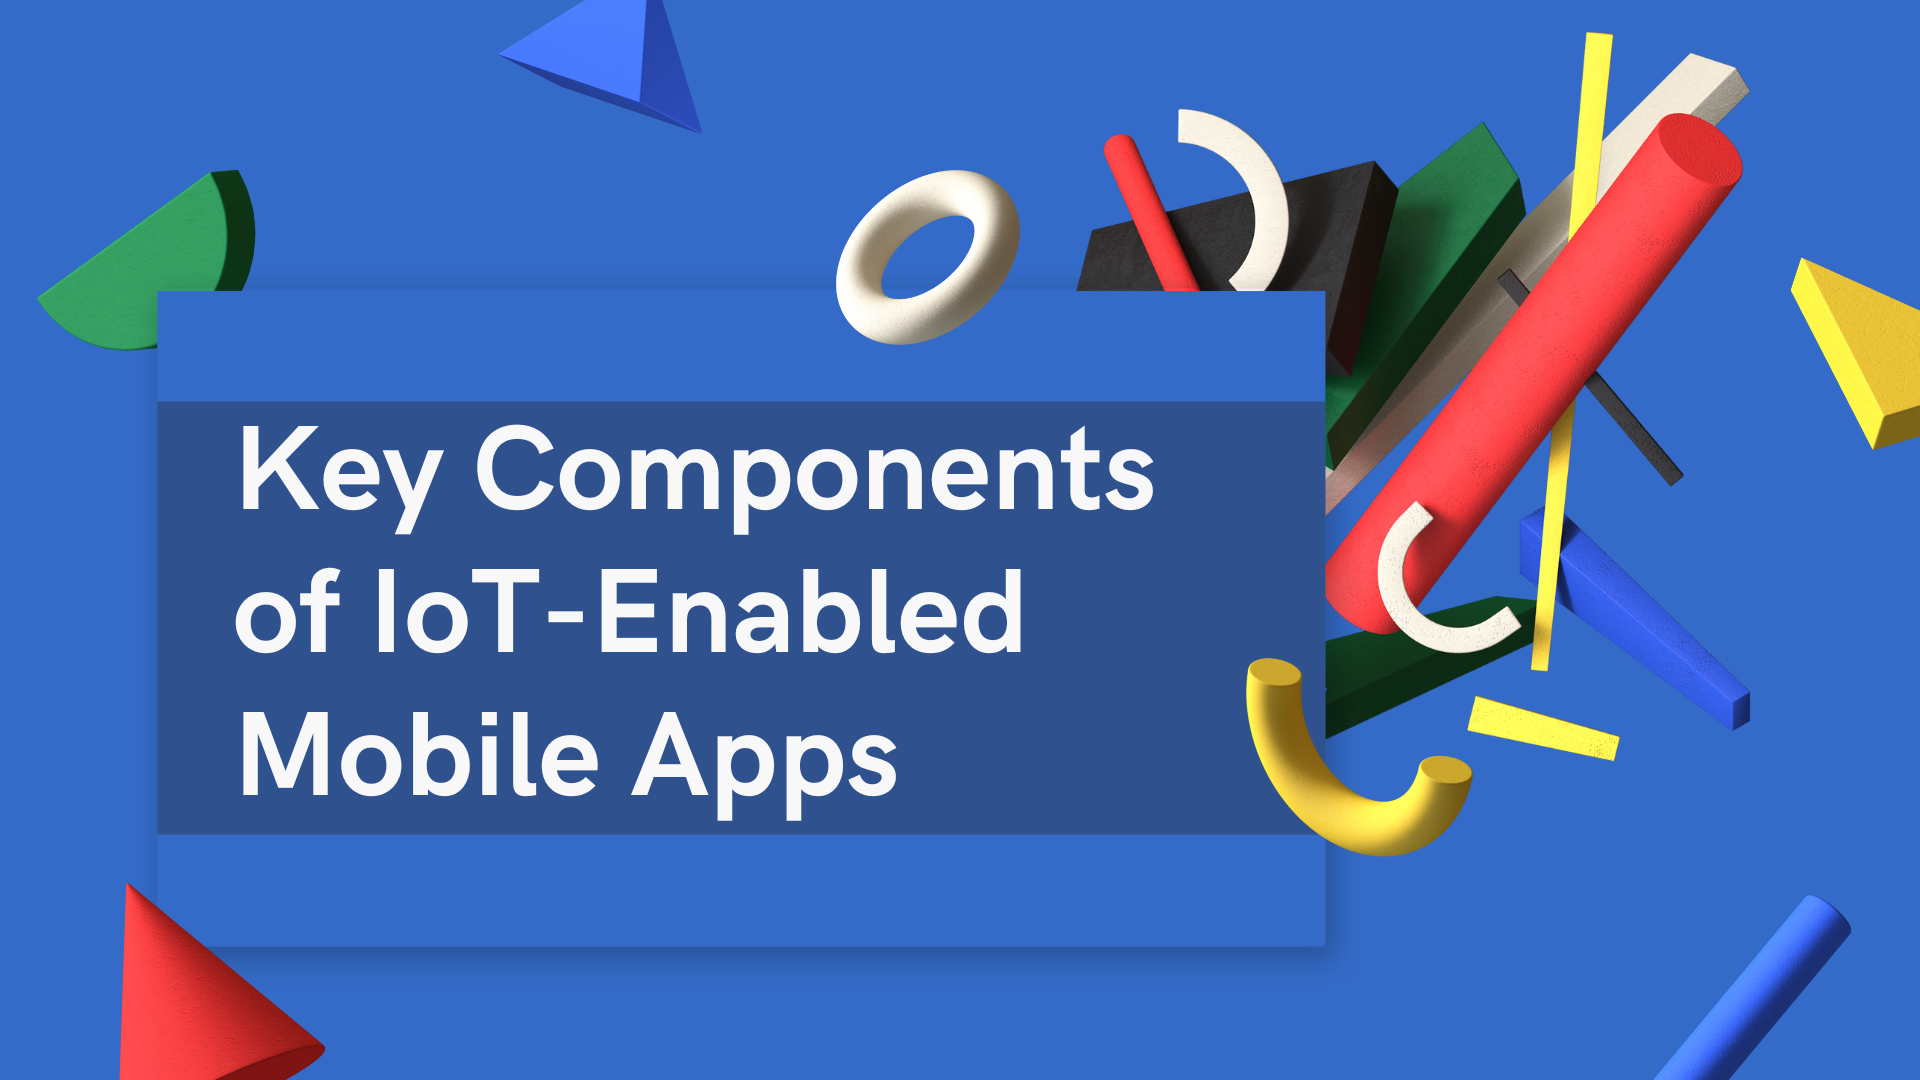 Key Components of IoT-Enabled Mobile Apps